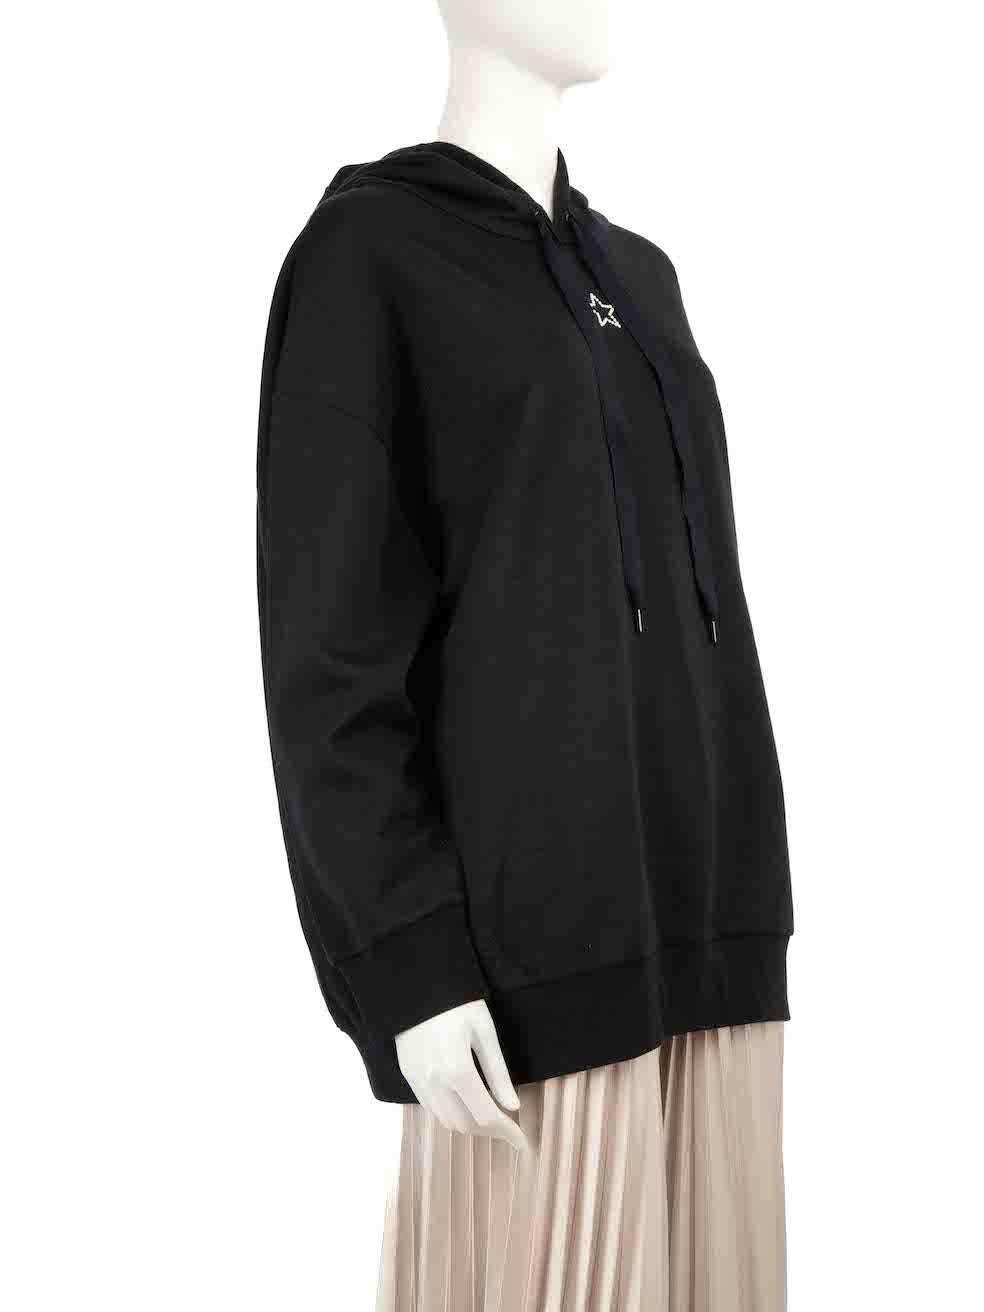 CONDITION is Never worn. No visible wear to hoodie is evident on this new Stella McCartney designer resale item.
 
 
 
 Details
 
 
 Black
 
 Cotton
 
 Long sleeves hoodie
 
 Star faux pearl detail on front
 
 Hooded with drawstring
 
 Stretchy
 
 
